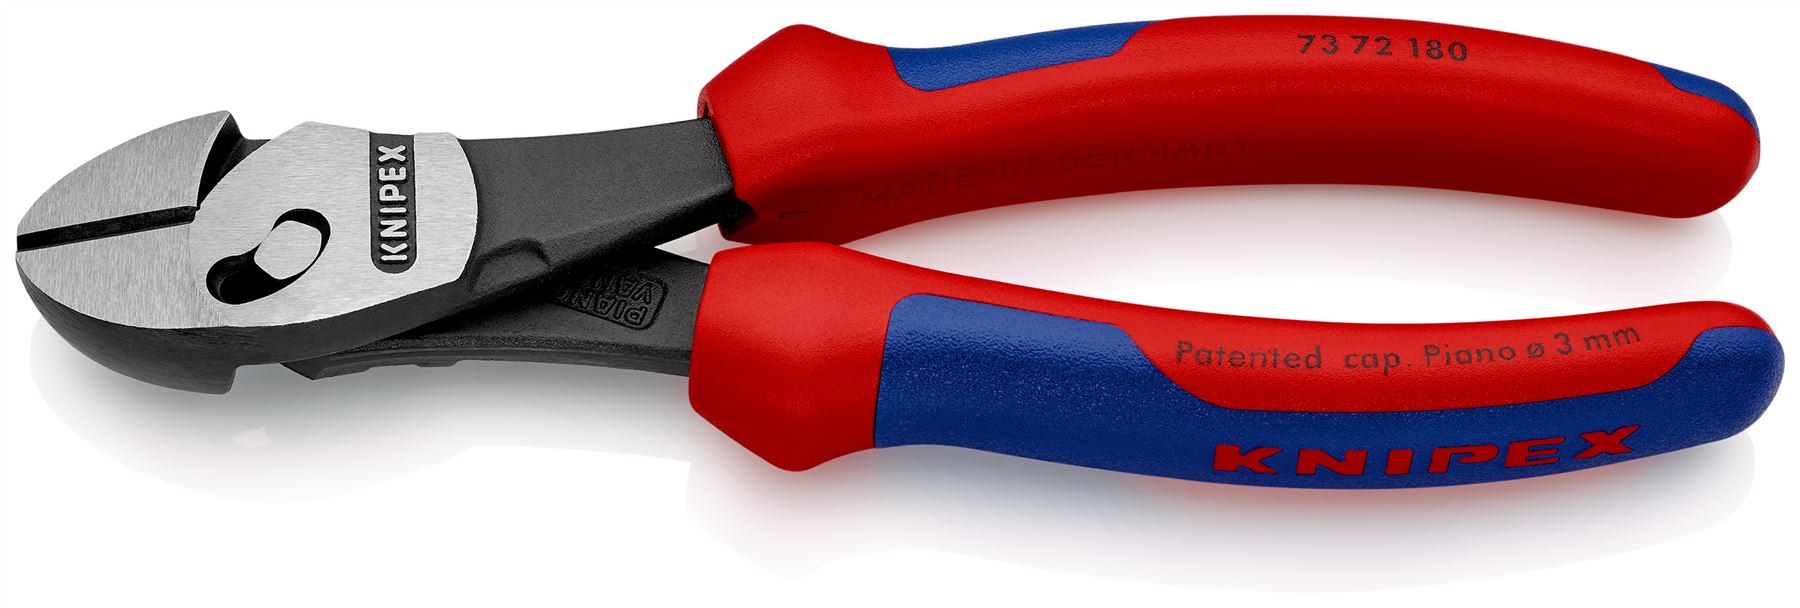 Knipex TwinForce High Performance Diagonal Cutters Cutting Pliers 180mm Multi Component Grips 73 72 180